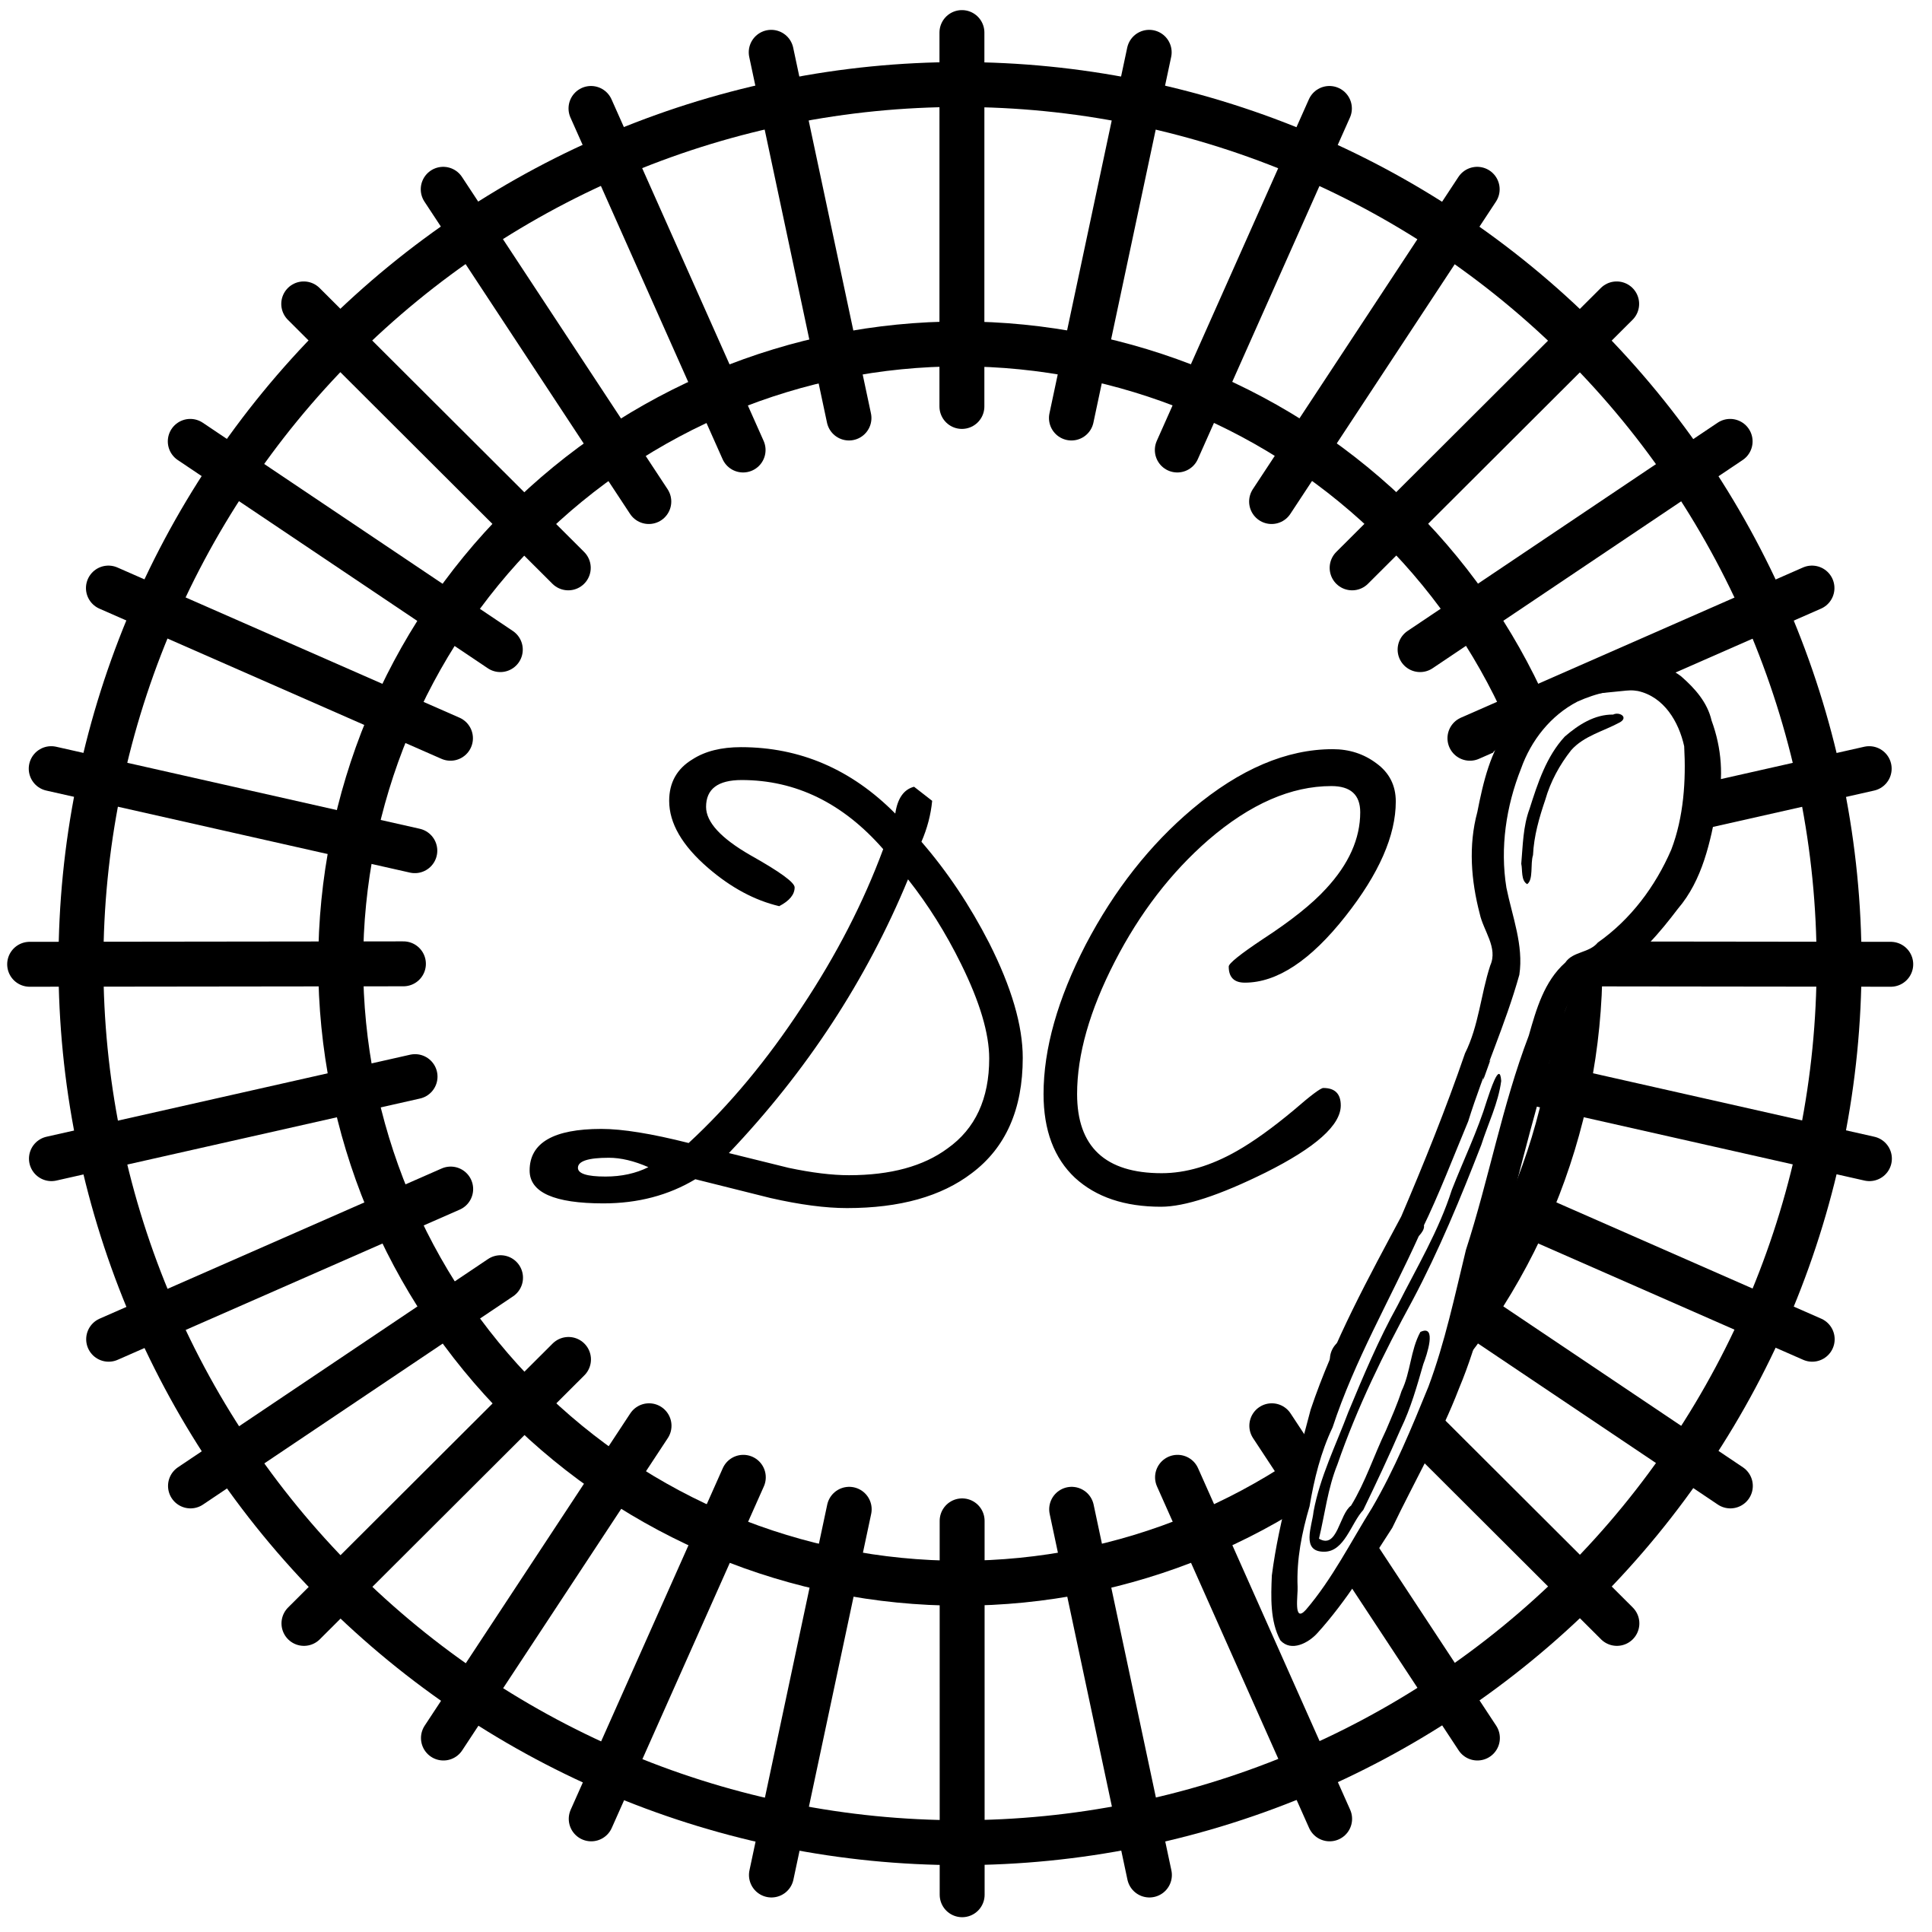 A circle of tracks. In its center in a handwriting font: DC. A spoon is laying on the right side, so it also looks like a plate